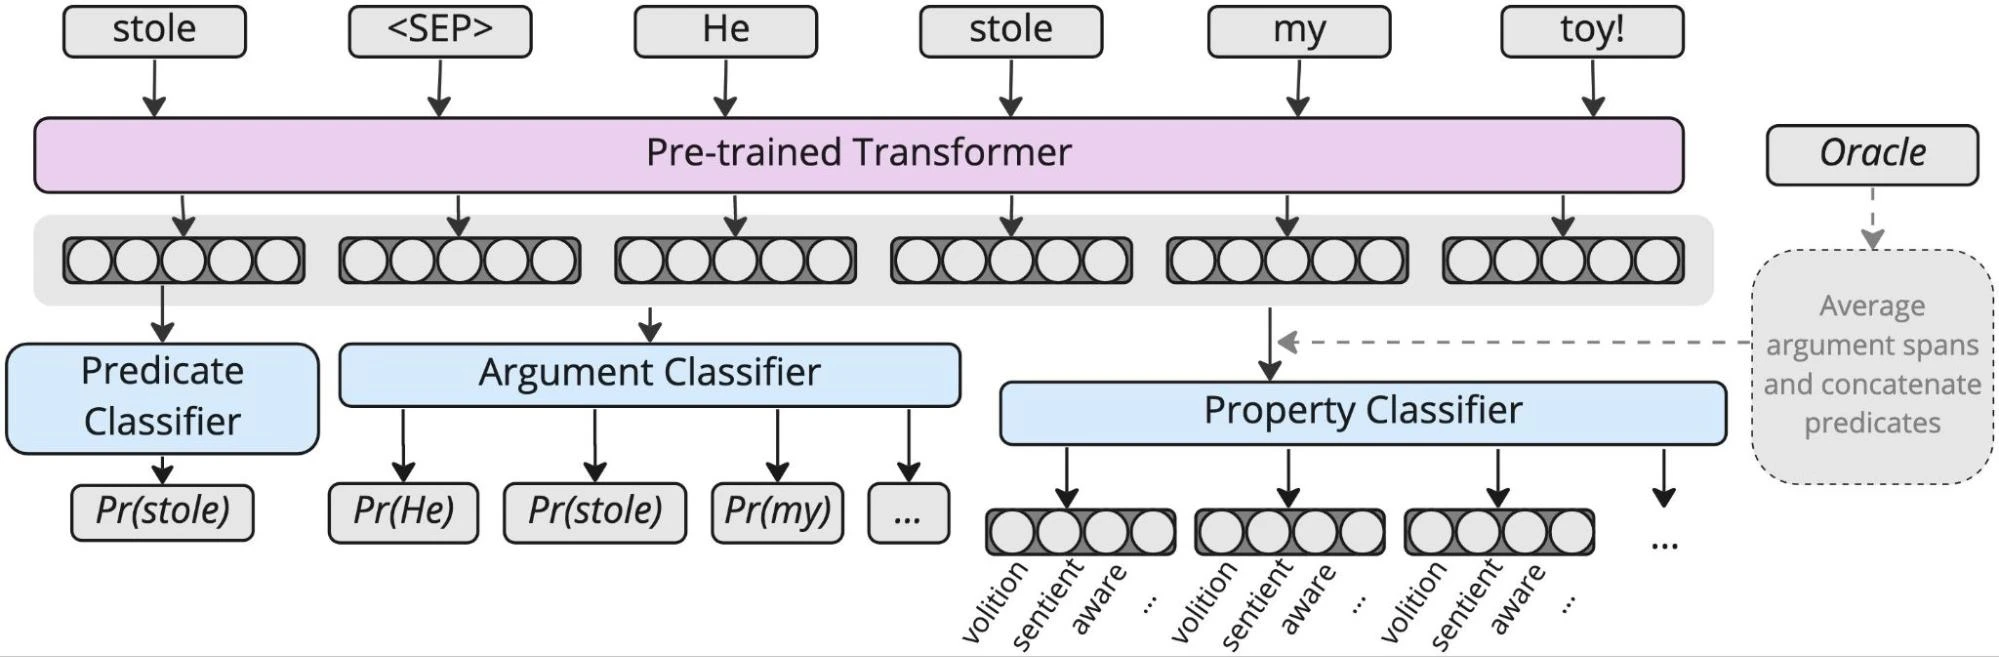 Figure 1: Architecture of our end-to-end semantic proto-role labeling system. Given a sentence and a candidate predicate, the model jointly learns to output whether or not the candidate is a predicate, the arguments of the candidate predicate, and the proto-role properties for each argument.